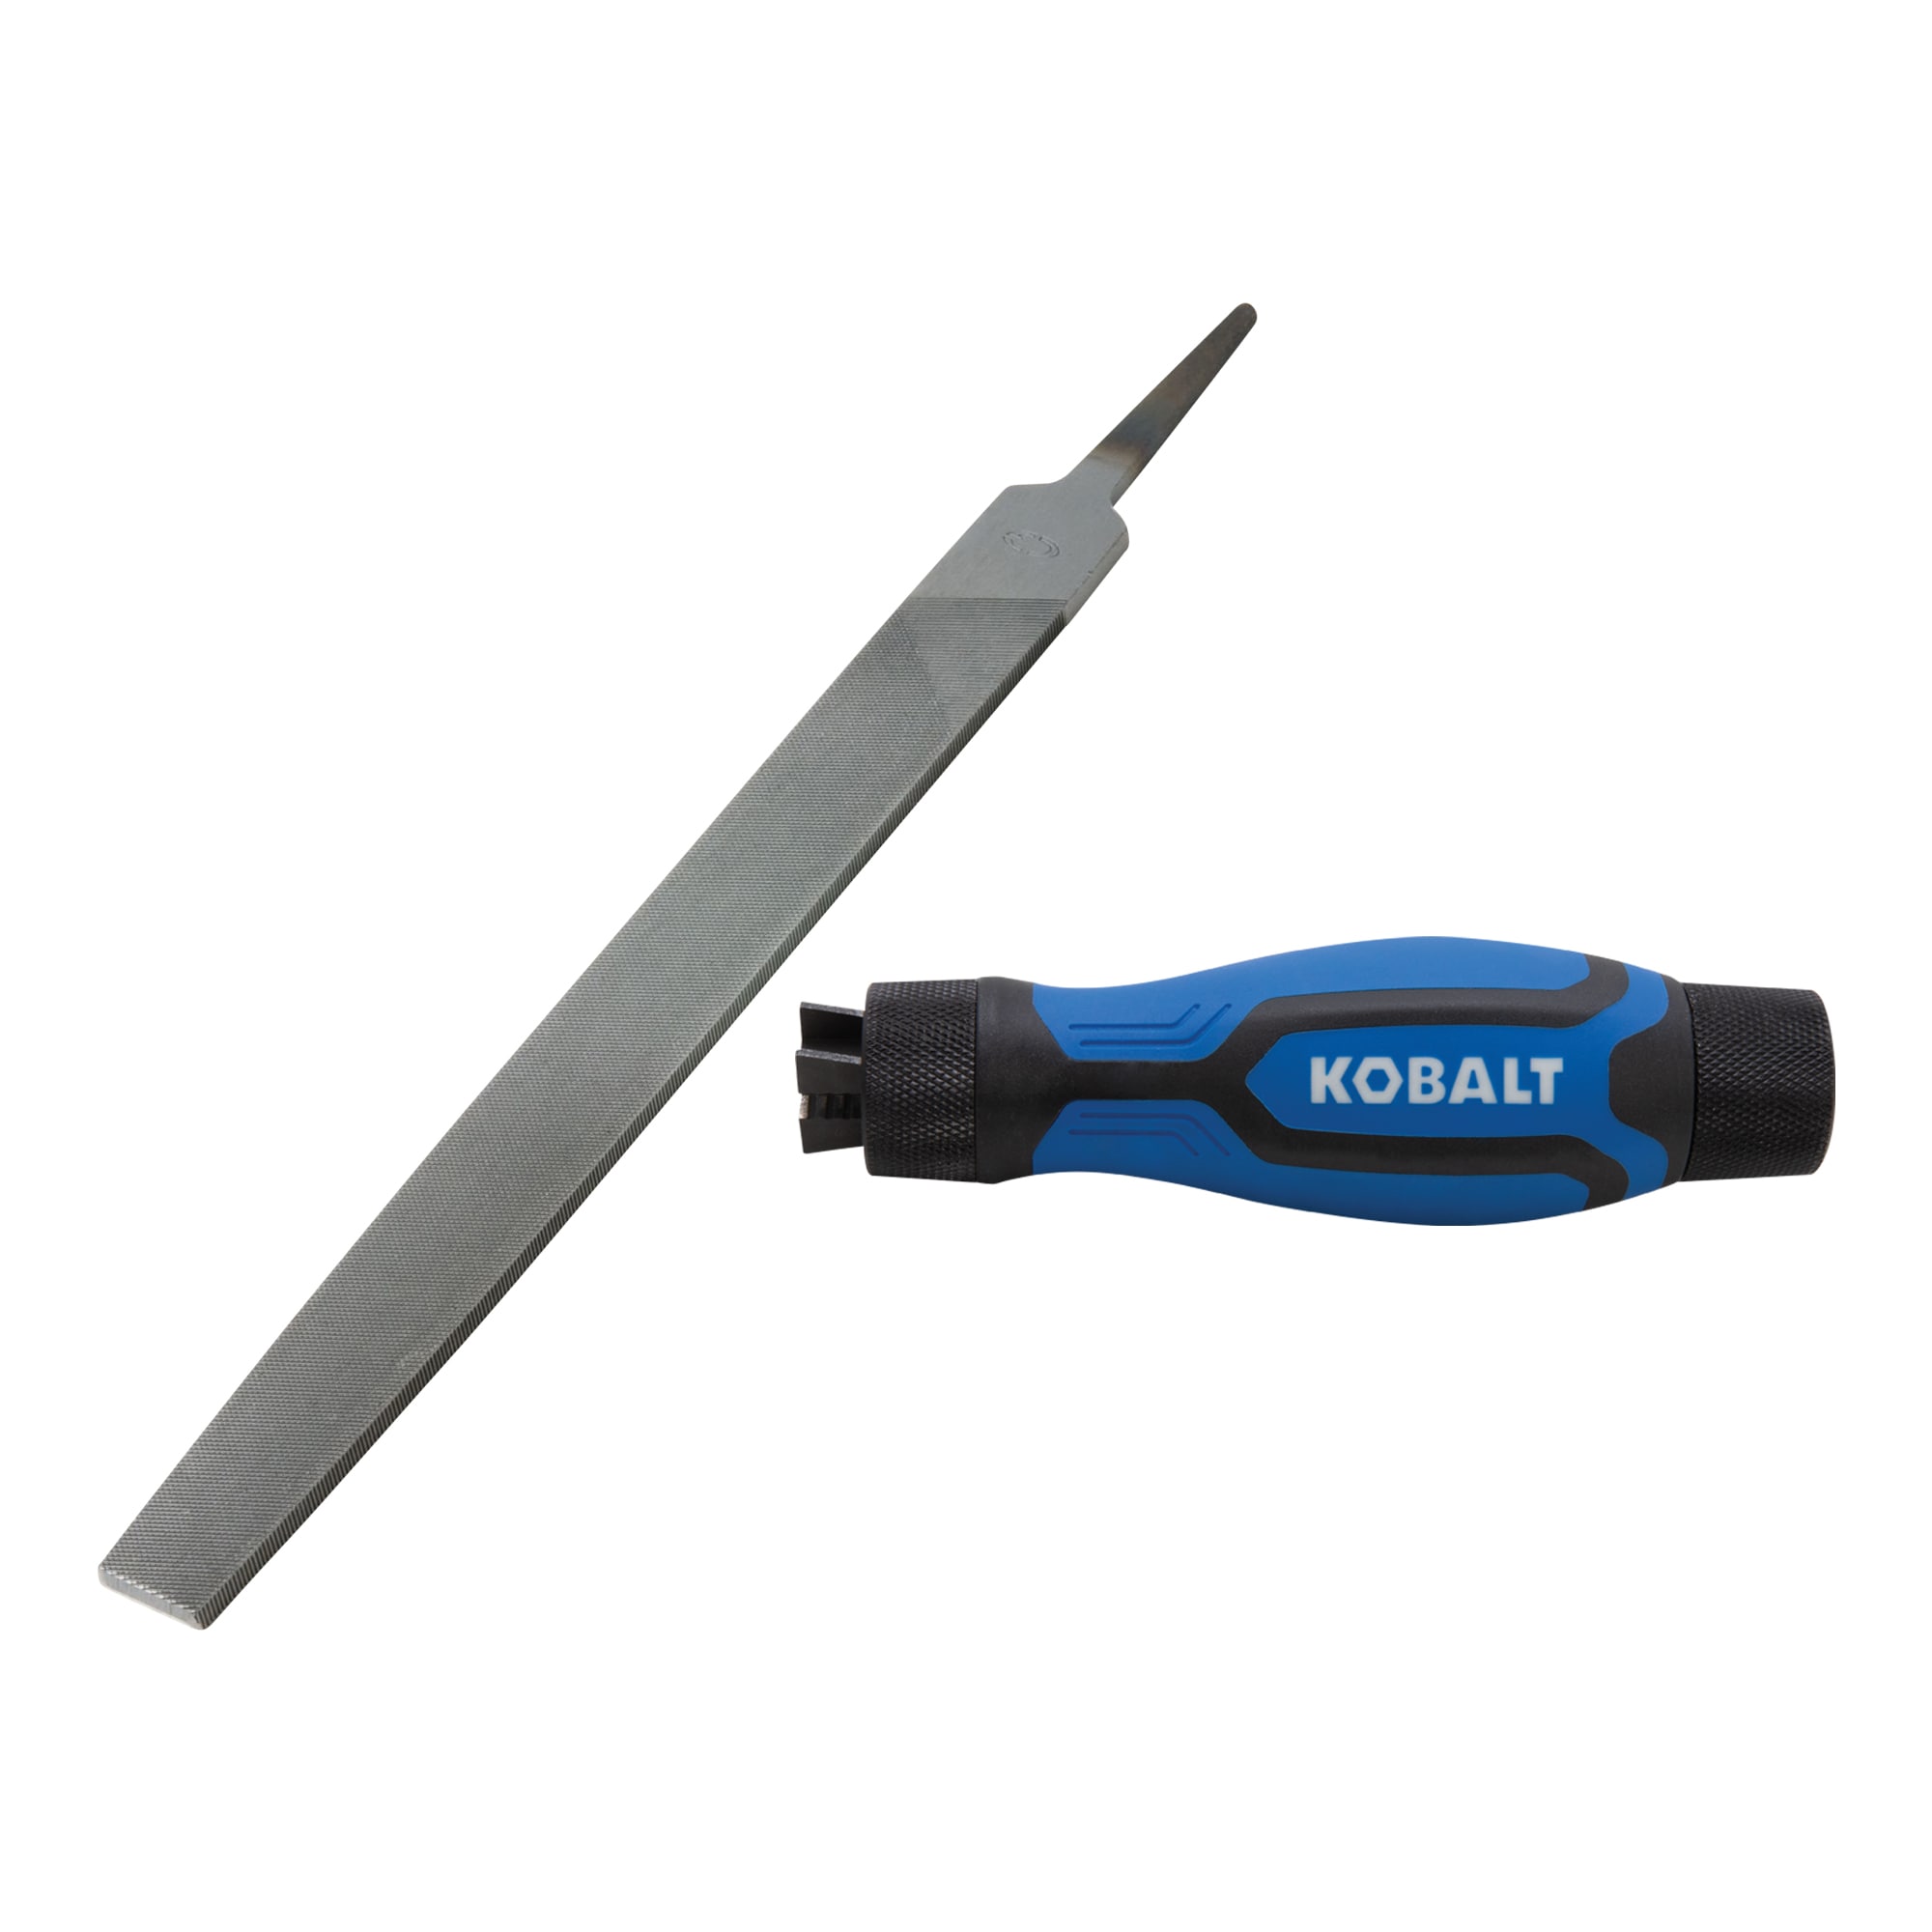 Kobalt 10-in. Flat Double-cut Second-cut File with File Handle File